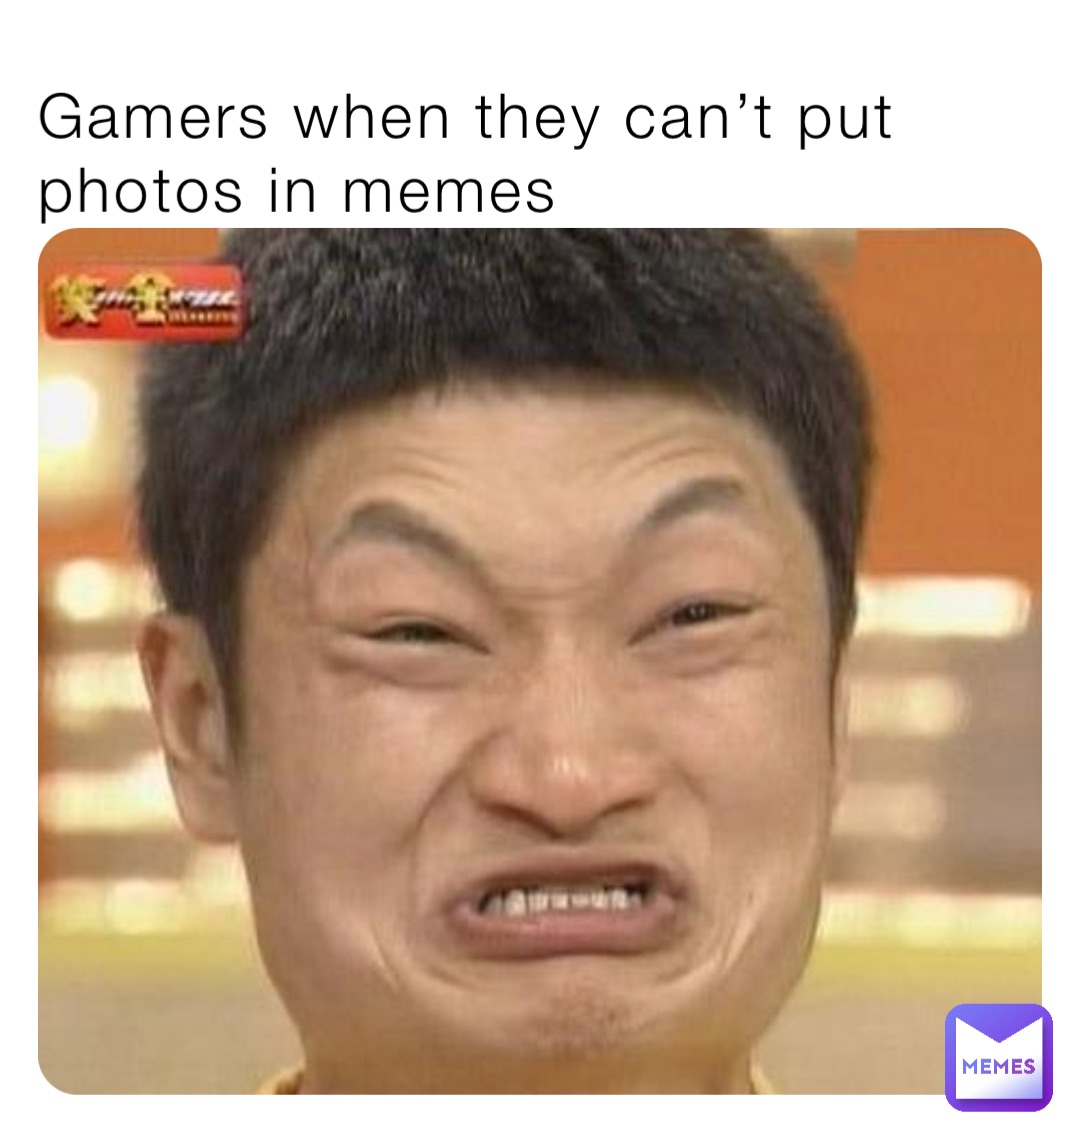 Gamers when they can’t put photos in memes